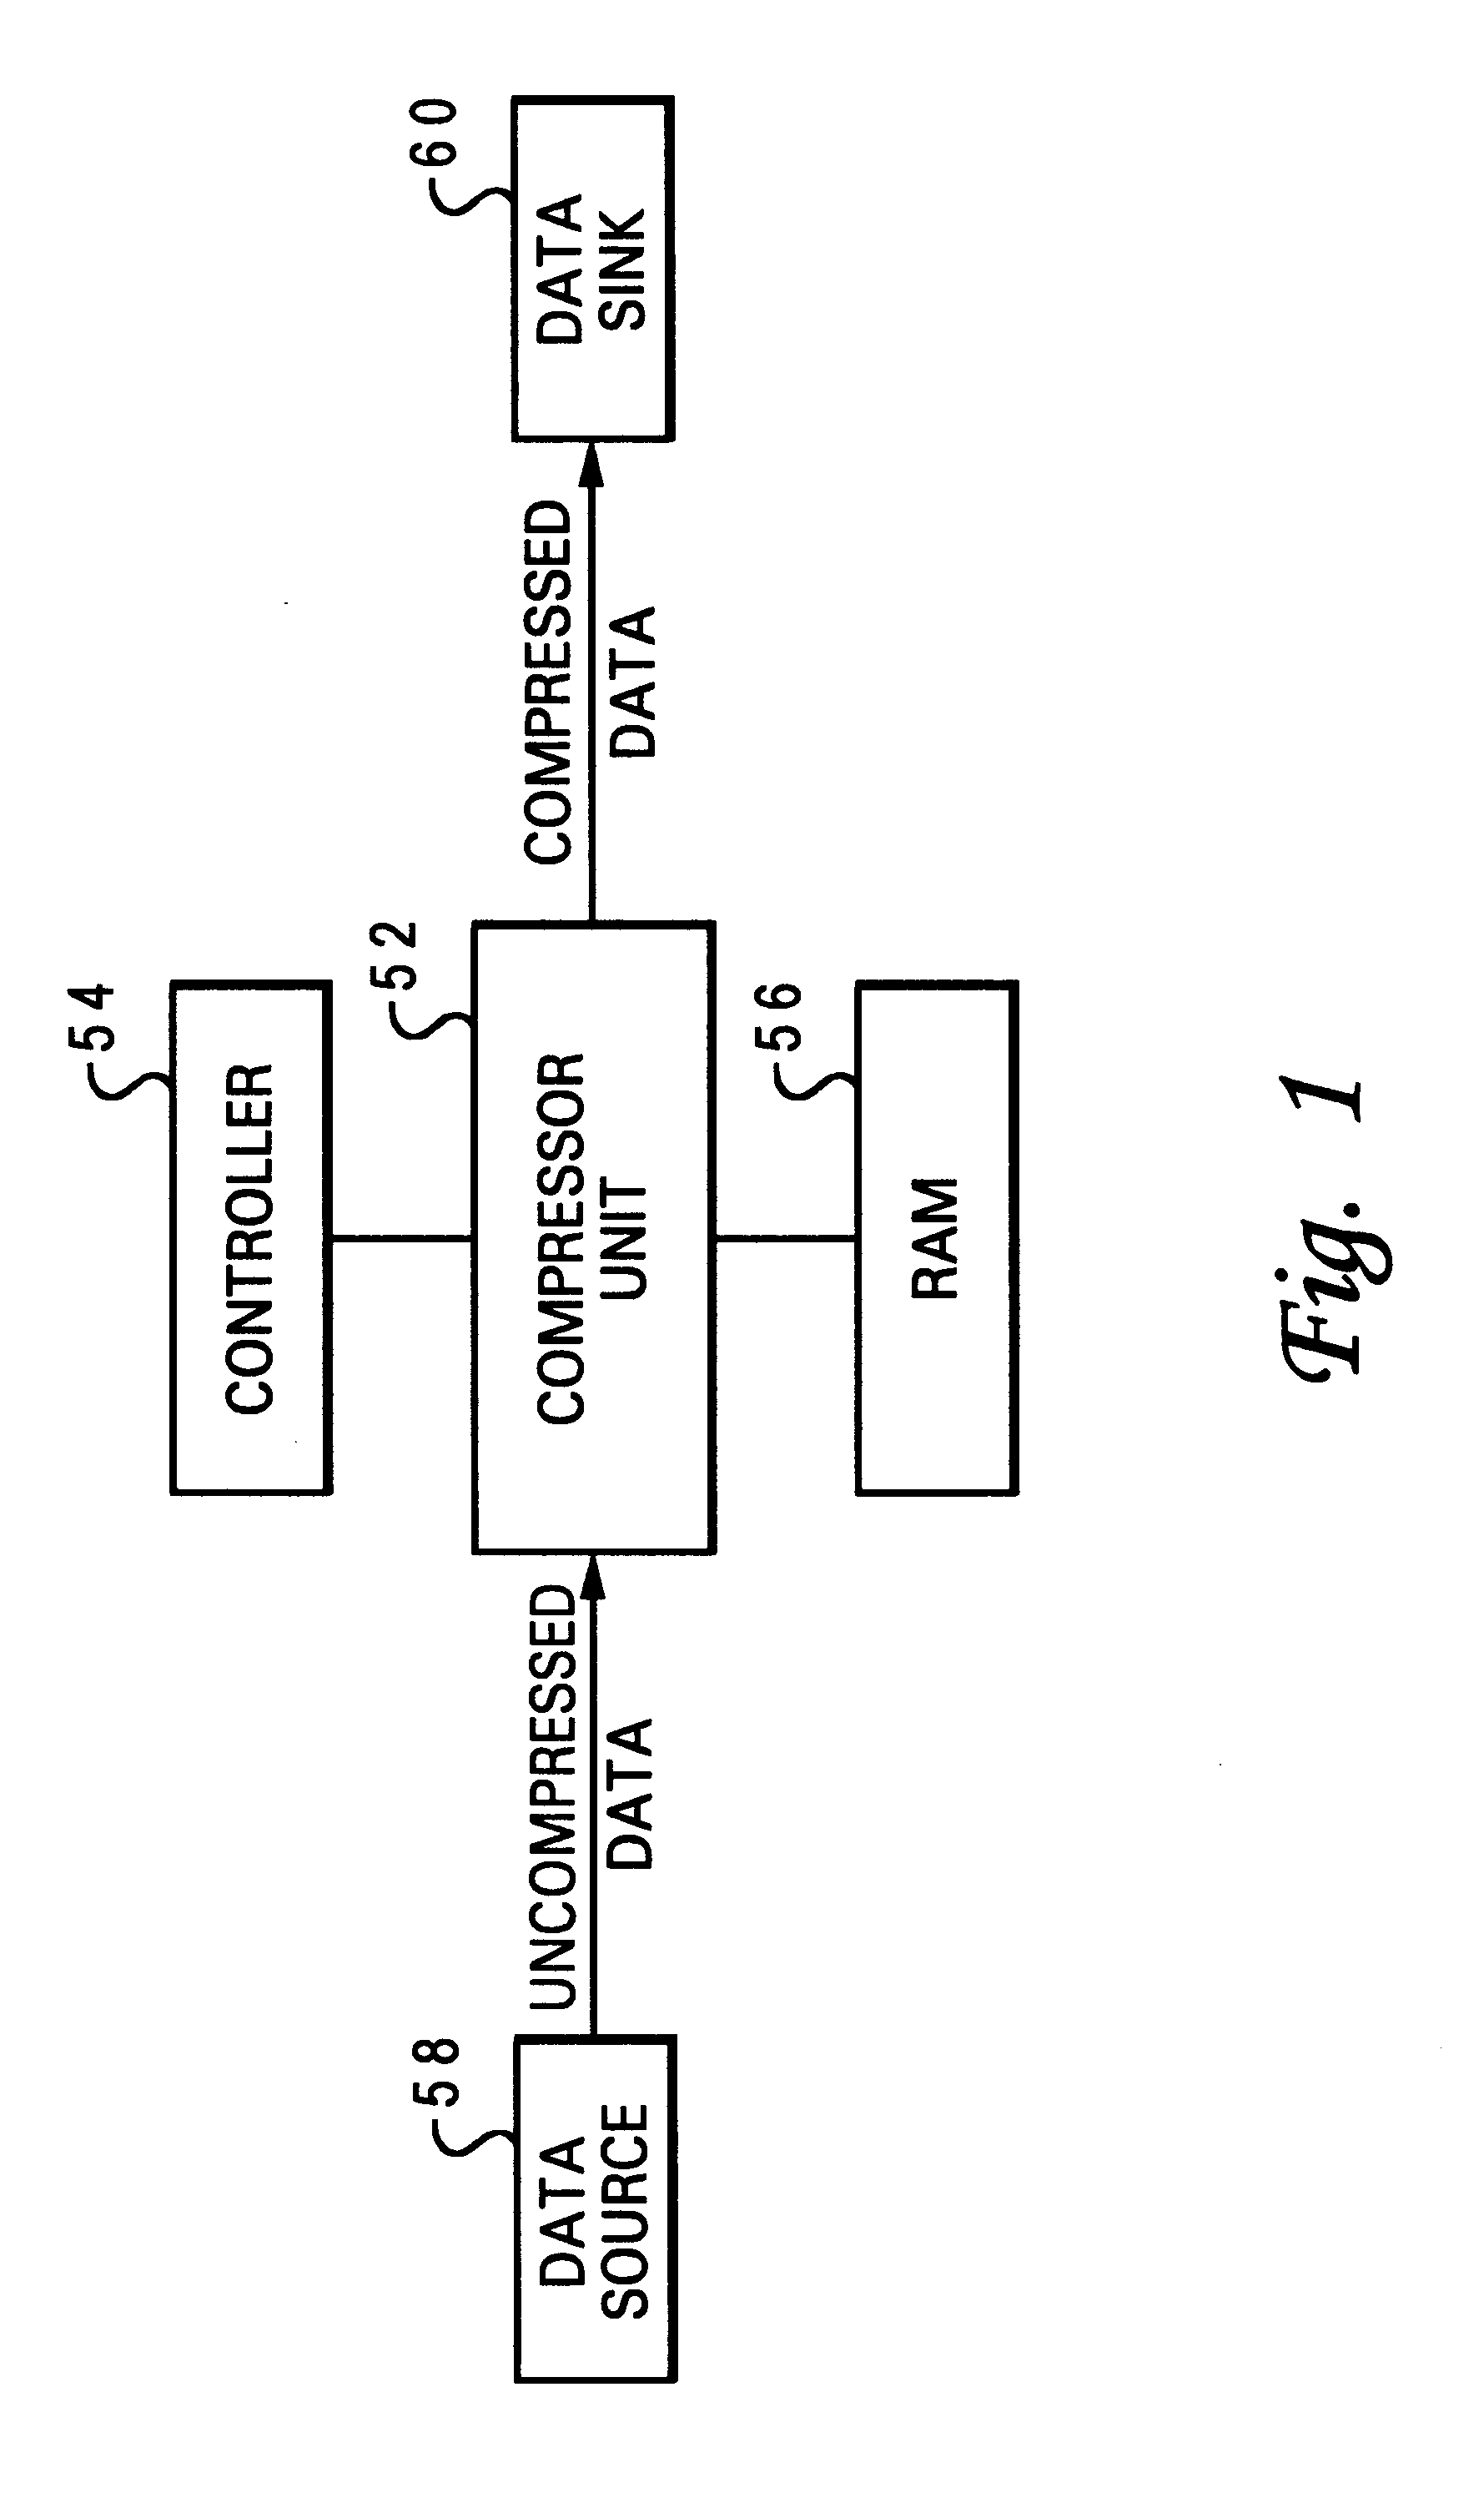 Method and system for compressing reduced instruction set computer (RISC) executable code through instruction set expansion